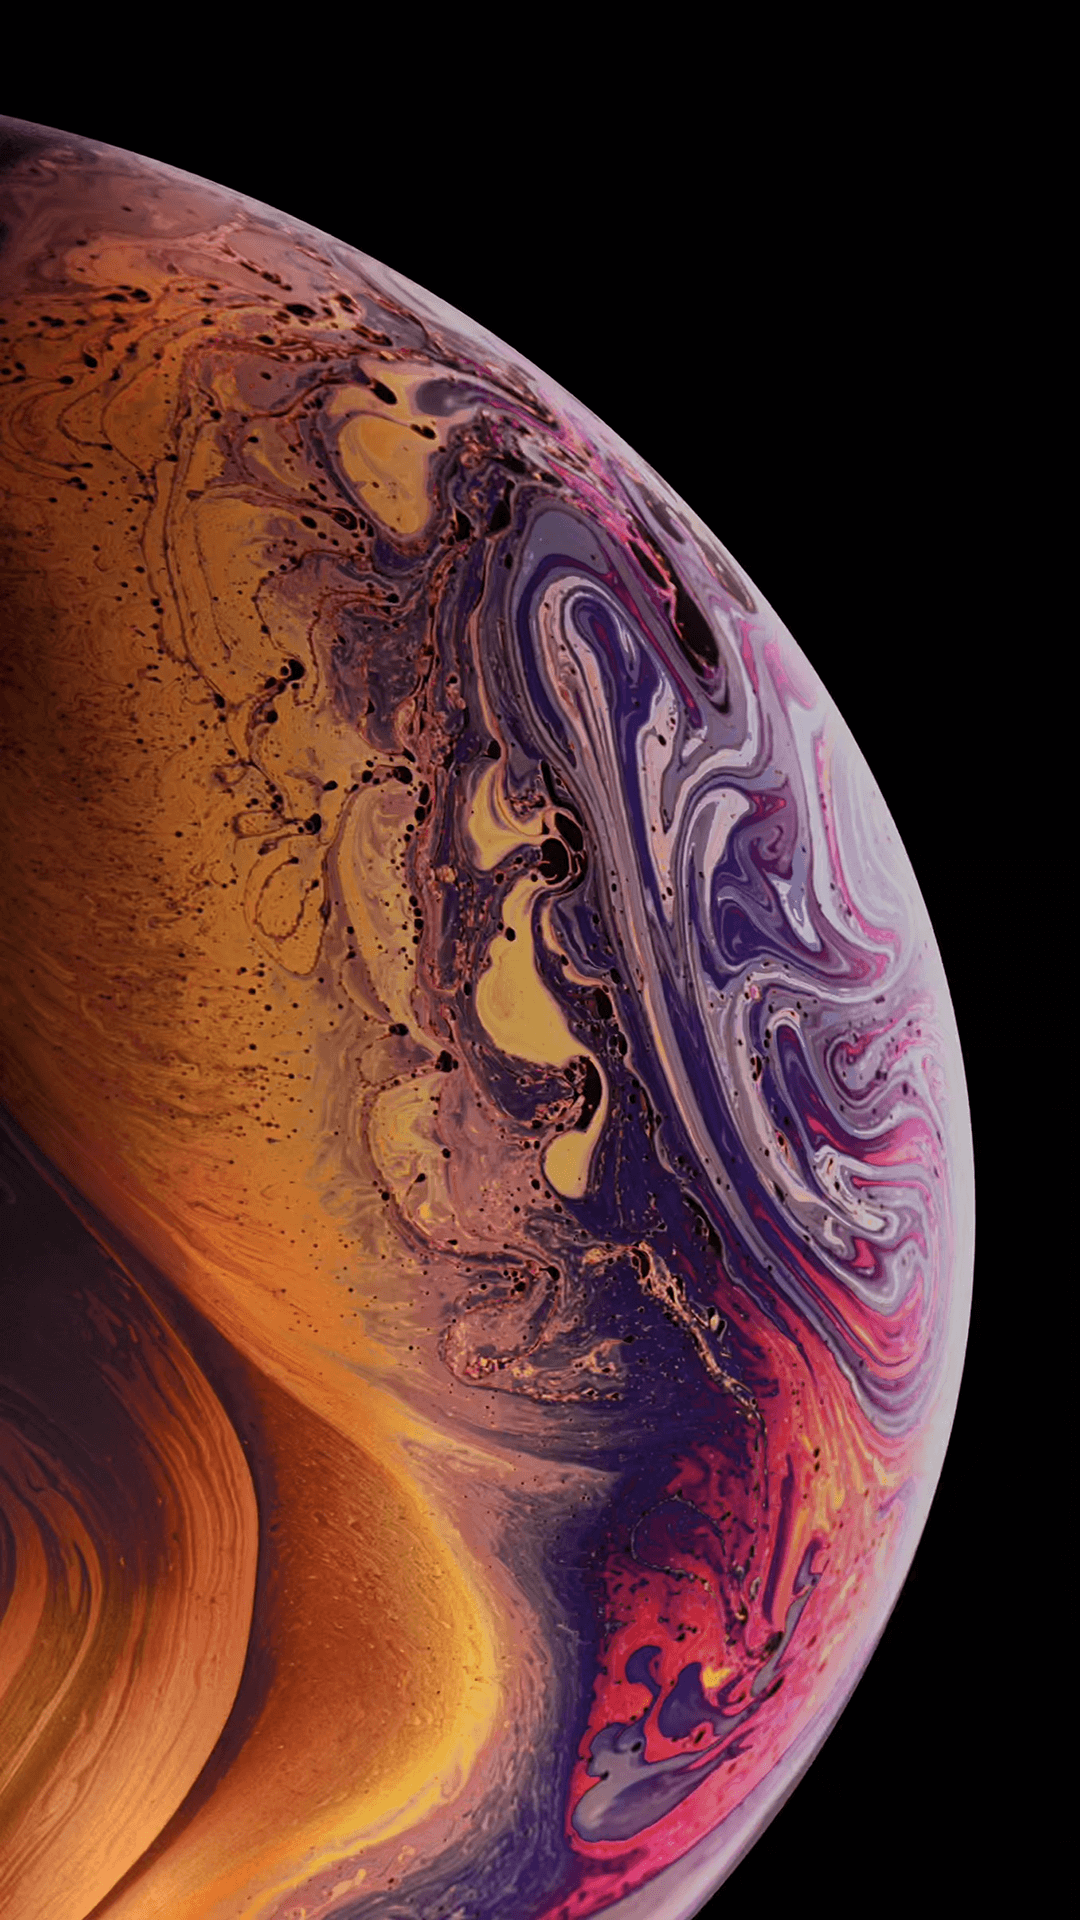 Download Car Wallpapers Iphone Xs Max Background